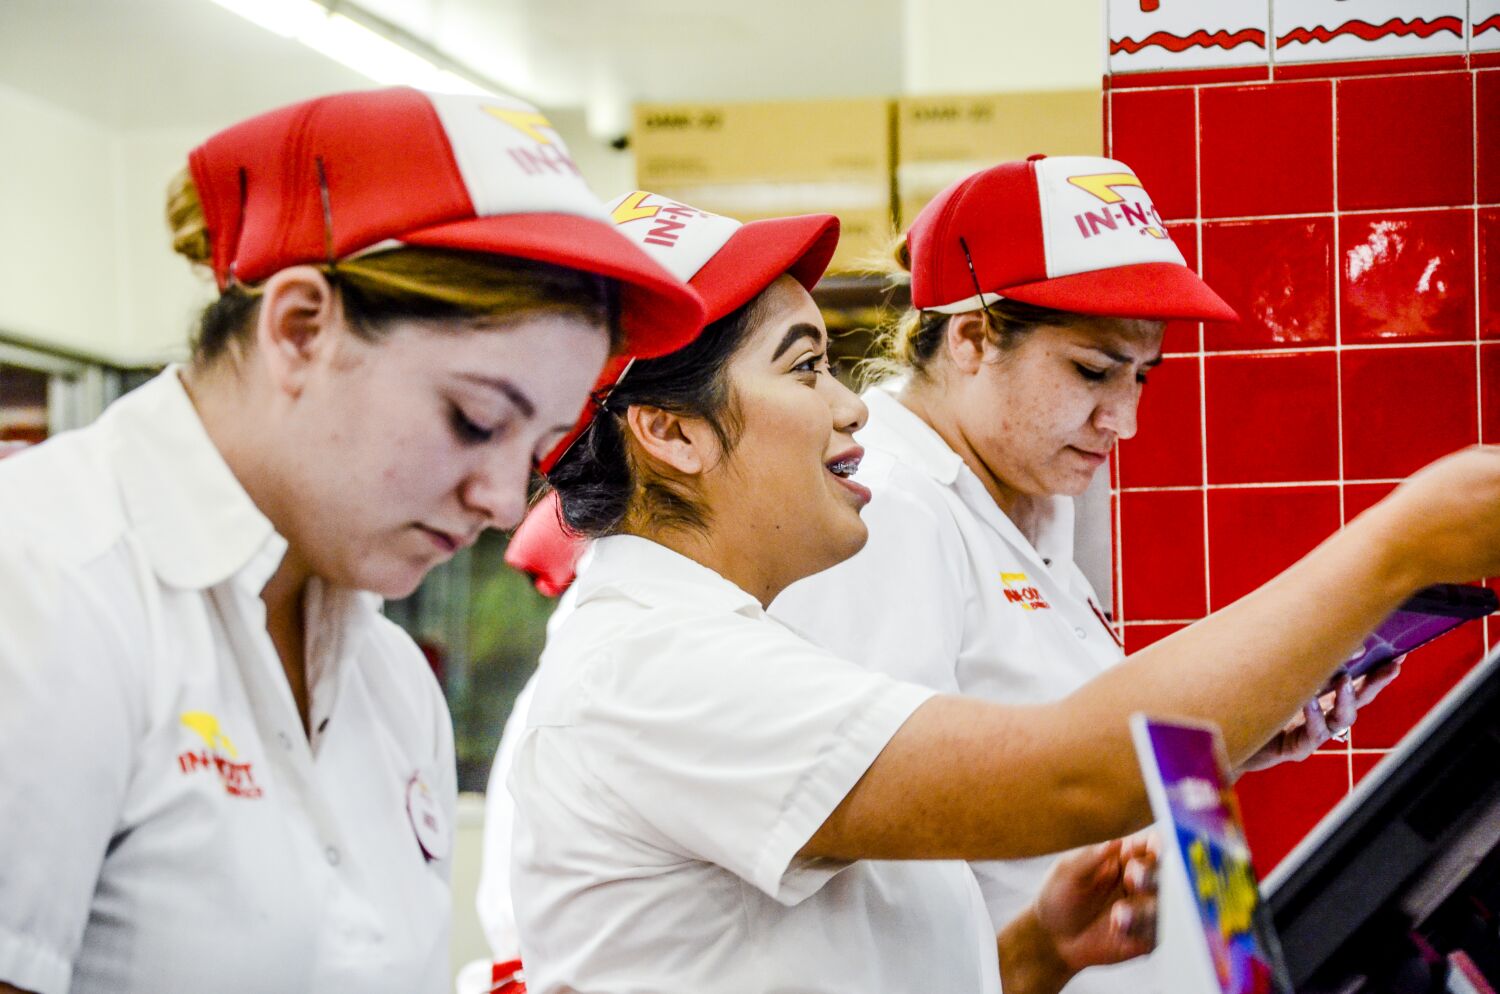 Column: With In-N-Out, Tennessee officials are double-doubling down on California